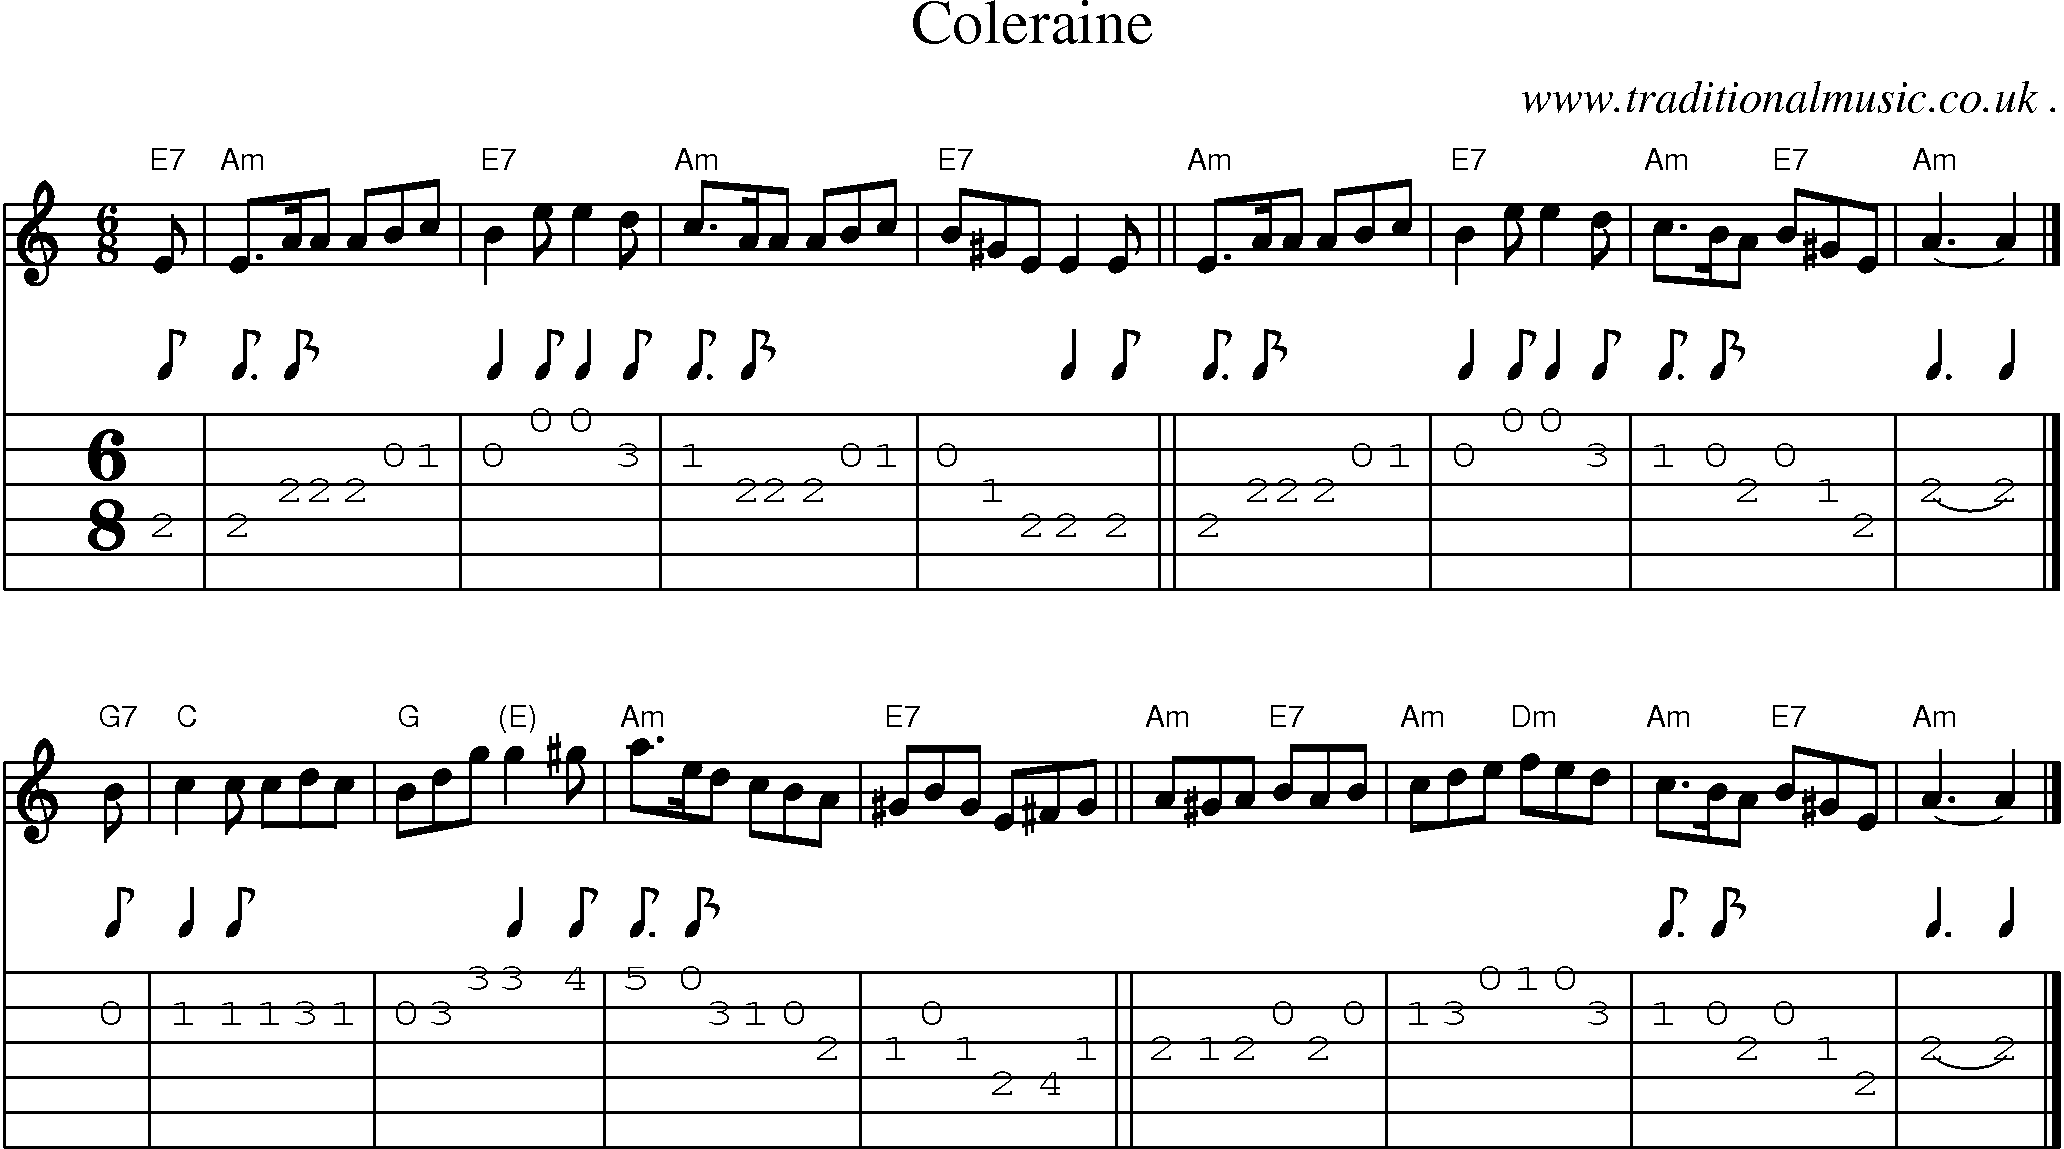 Sheet-music  score, Chords and Guitar Tabs for Coleraine